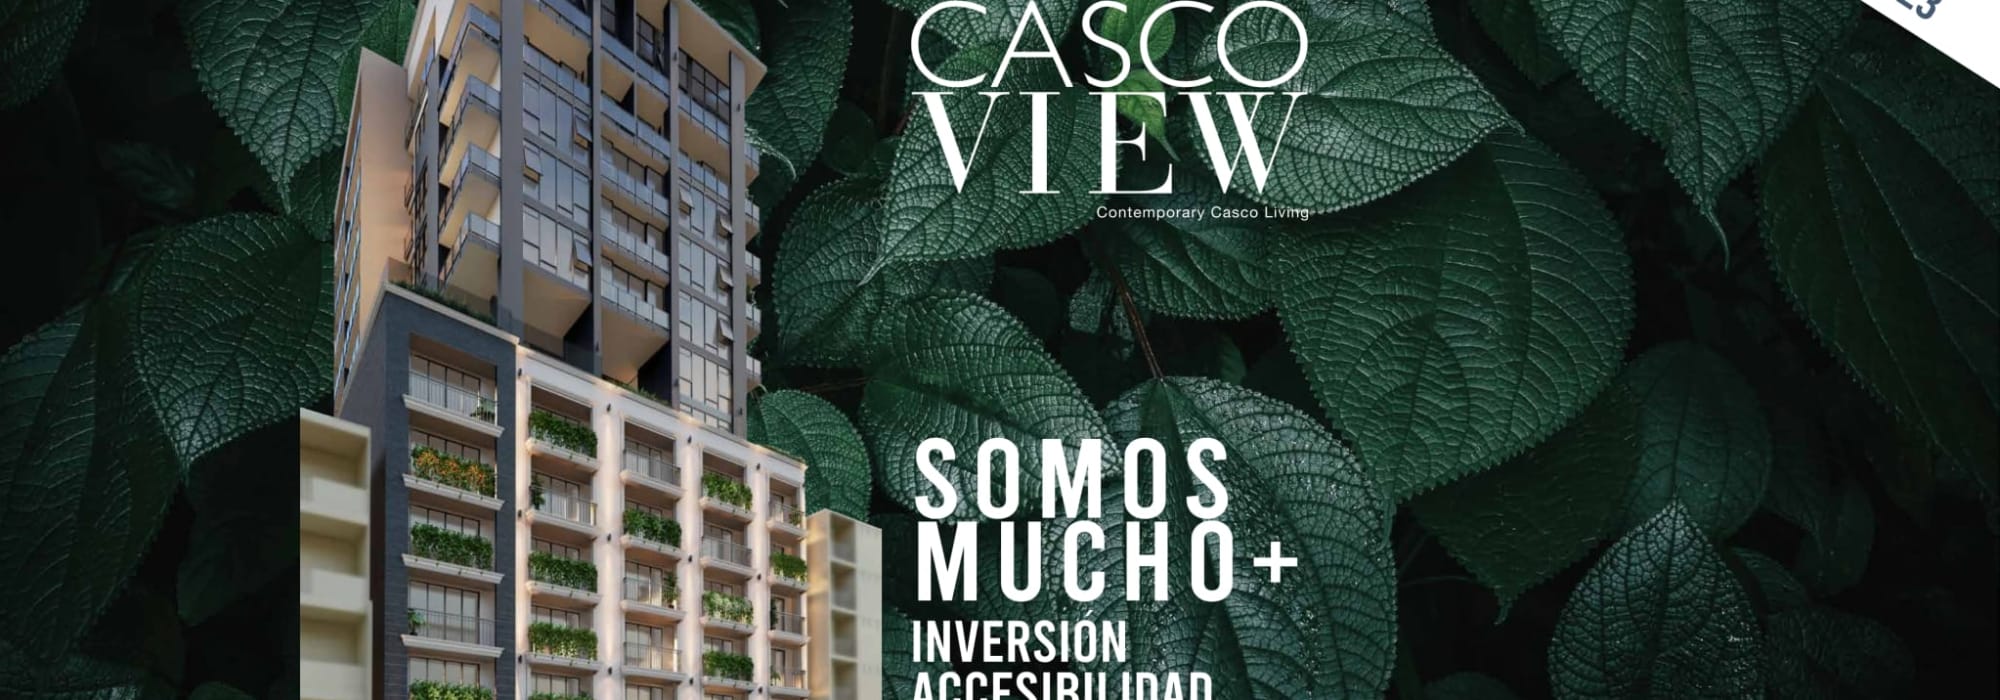 CASCO VIEW -Living in the Historic Center is possible